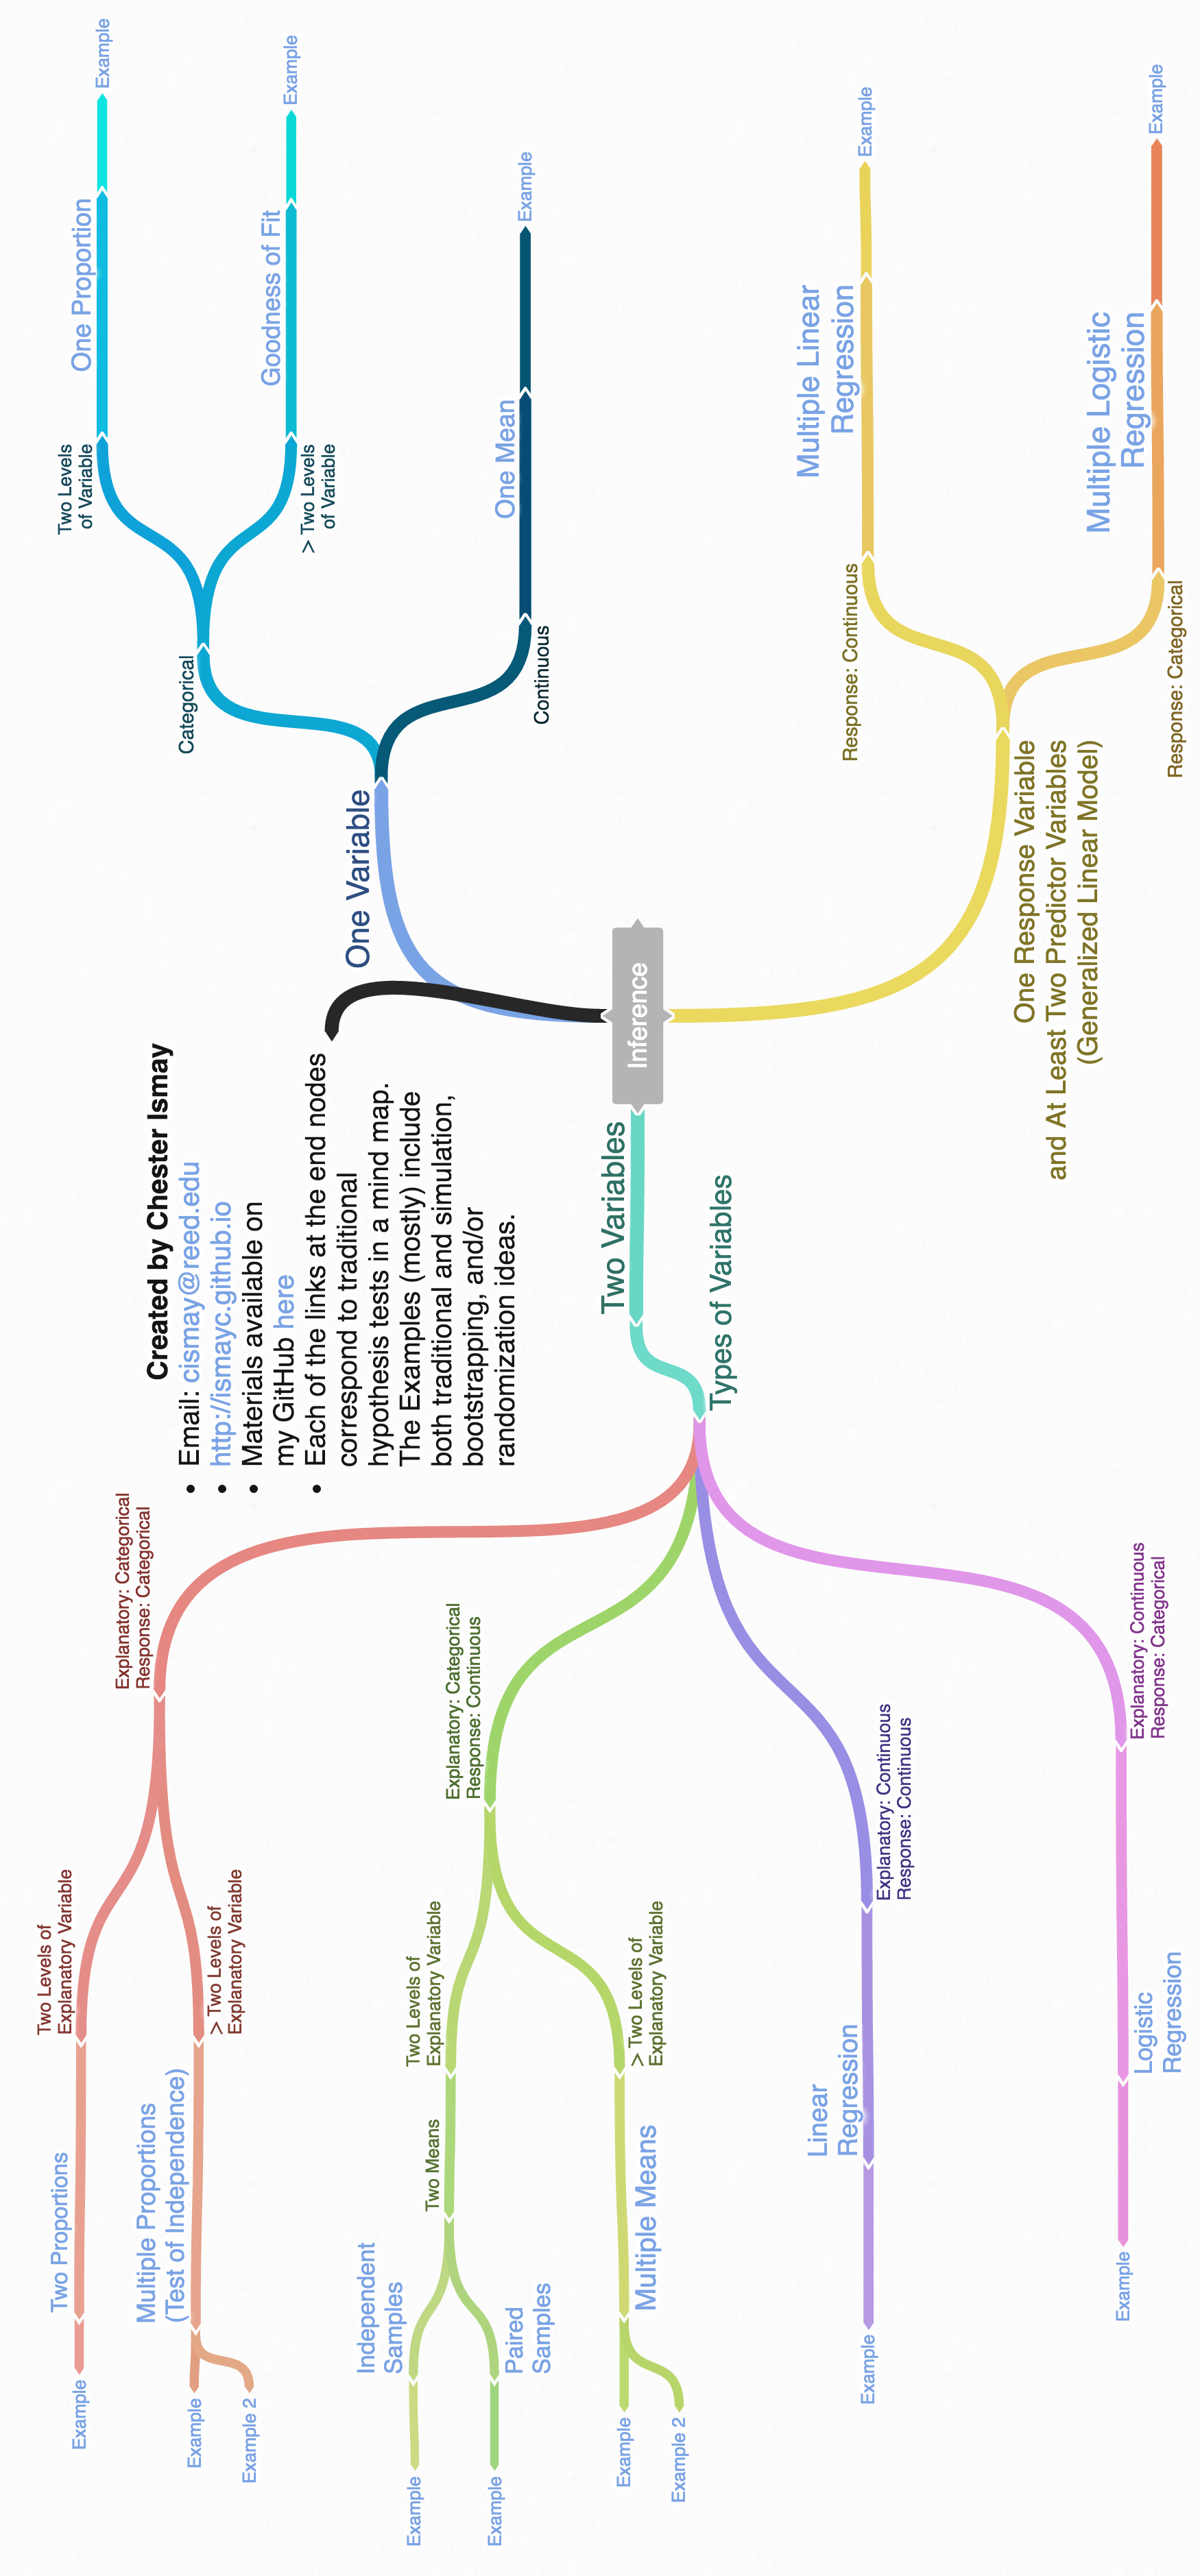 Mind map for Inference